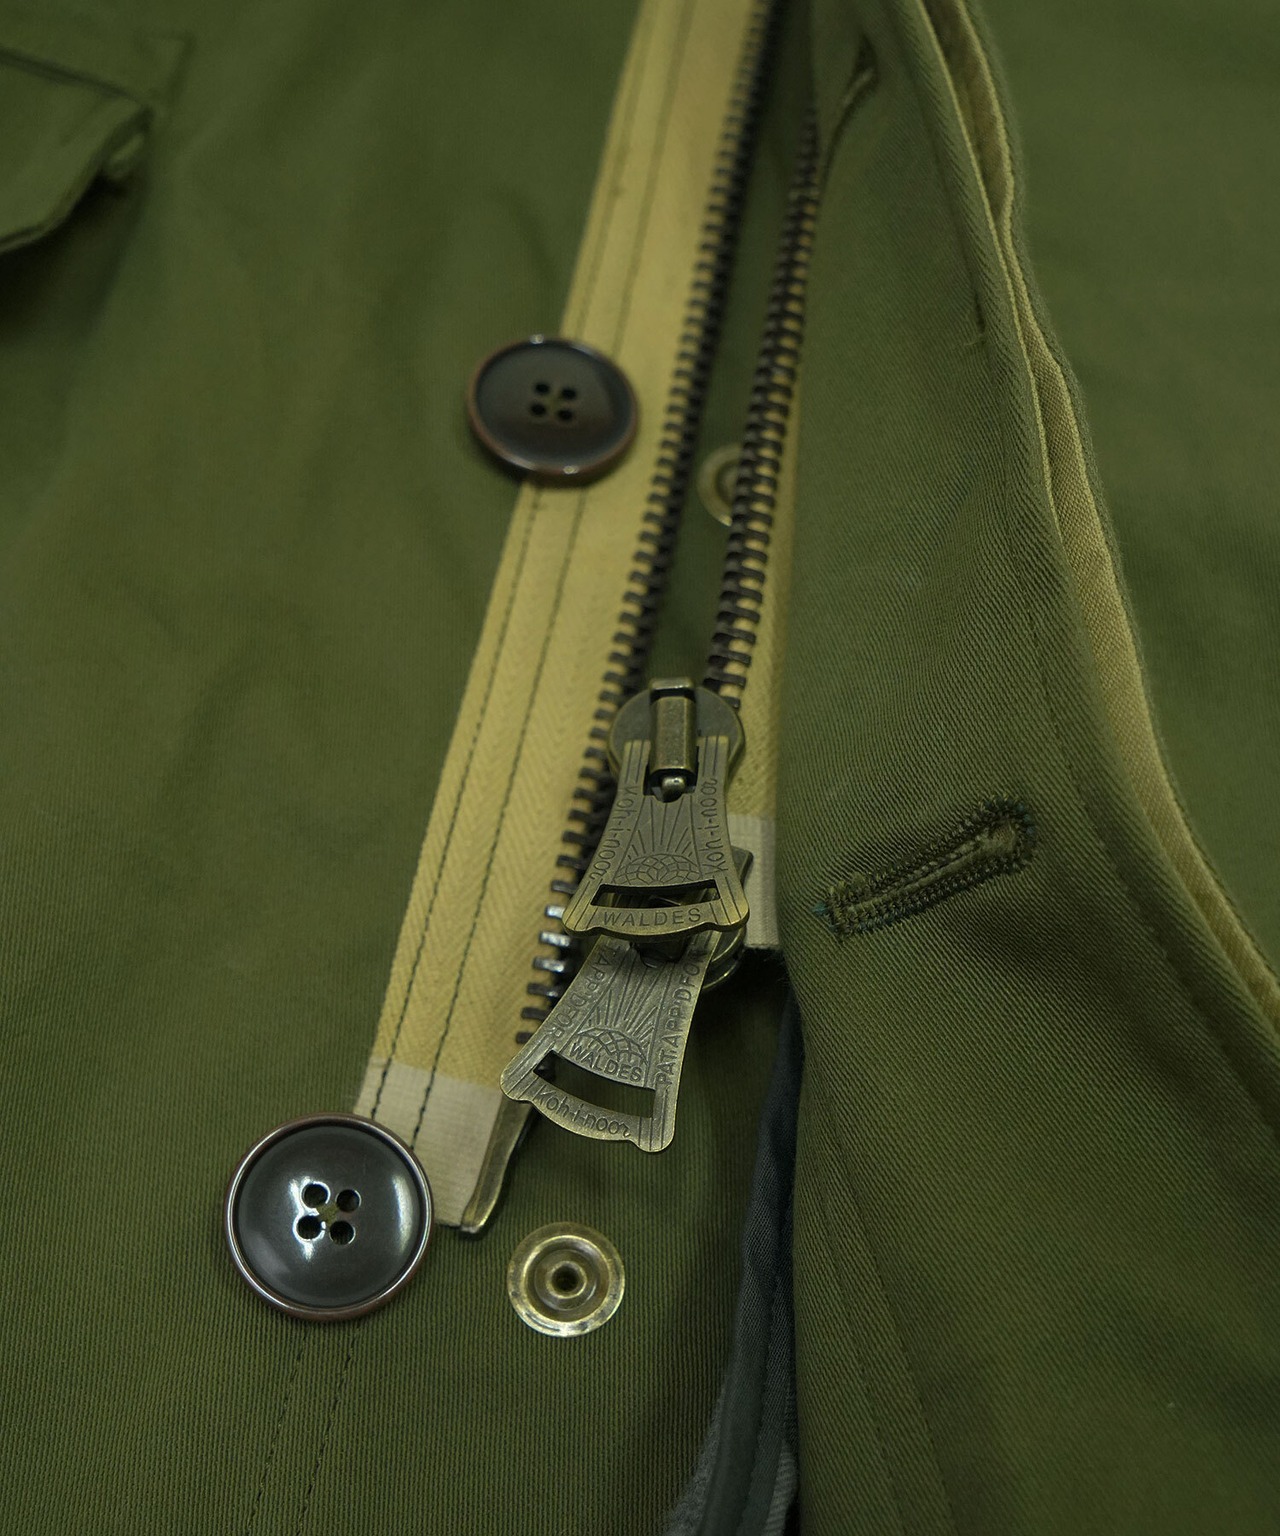 EARLY M-64 HOODED-COAT